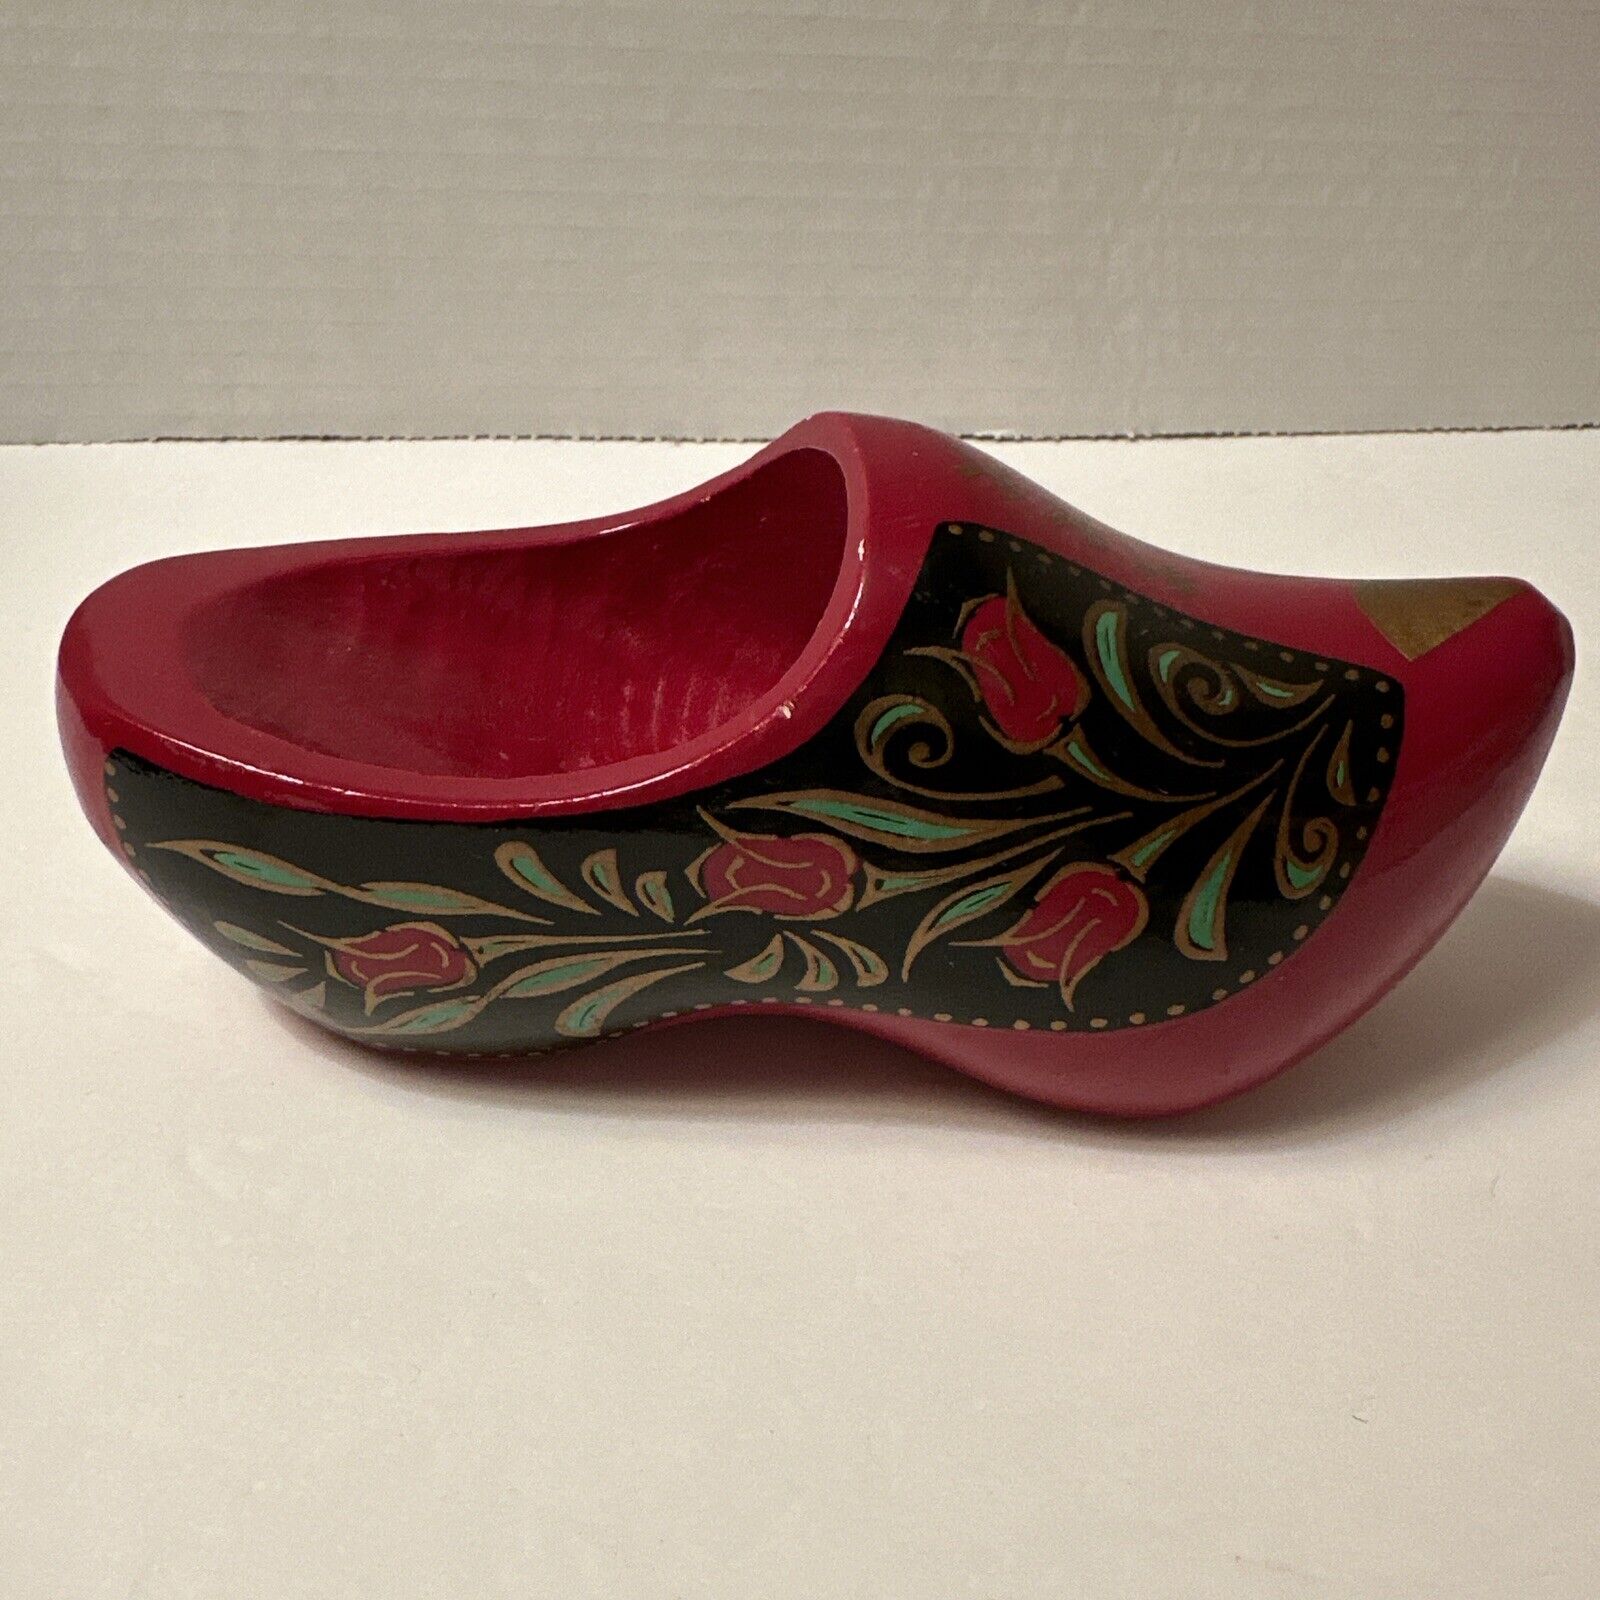 VINTAGE Red Holland Dutch Wooden Shoe Hand Painted w/Floral Motif